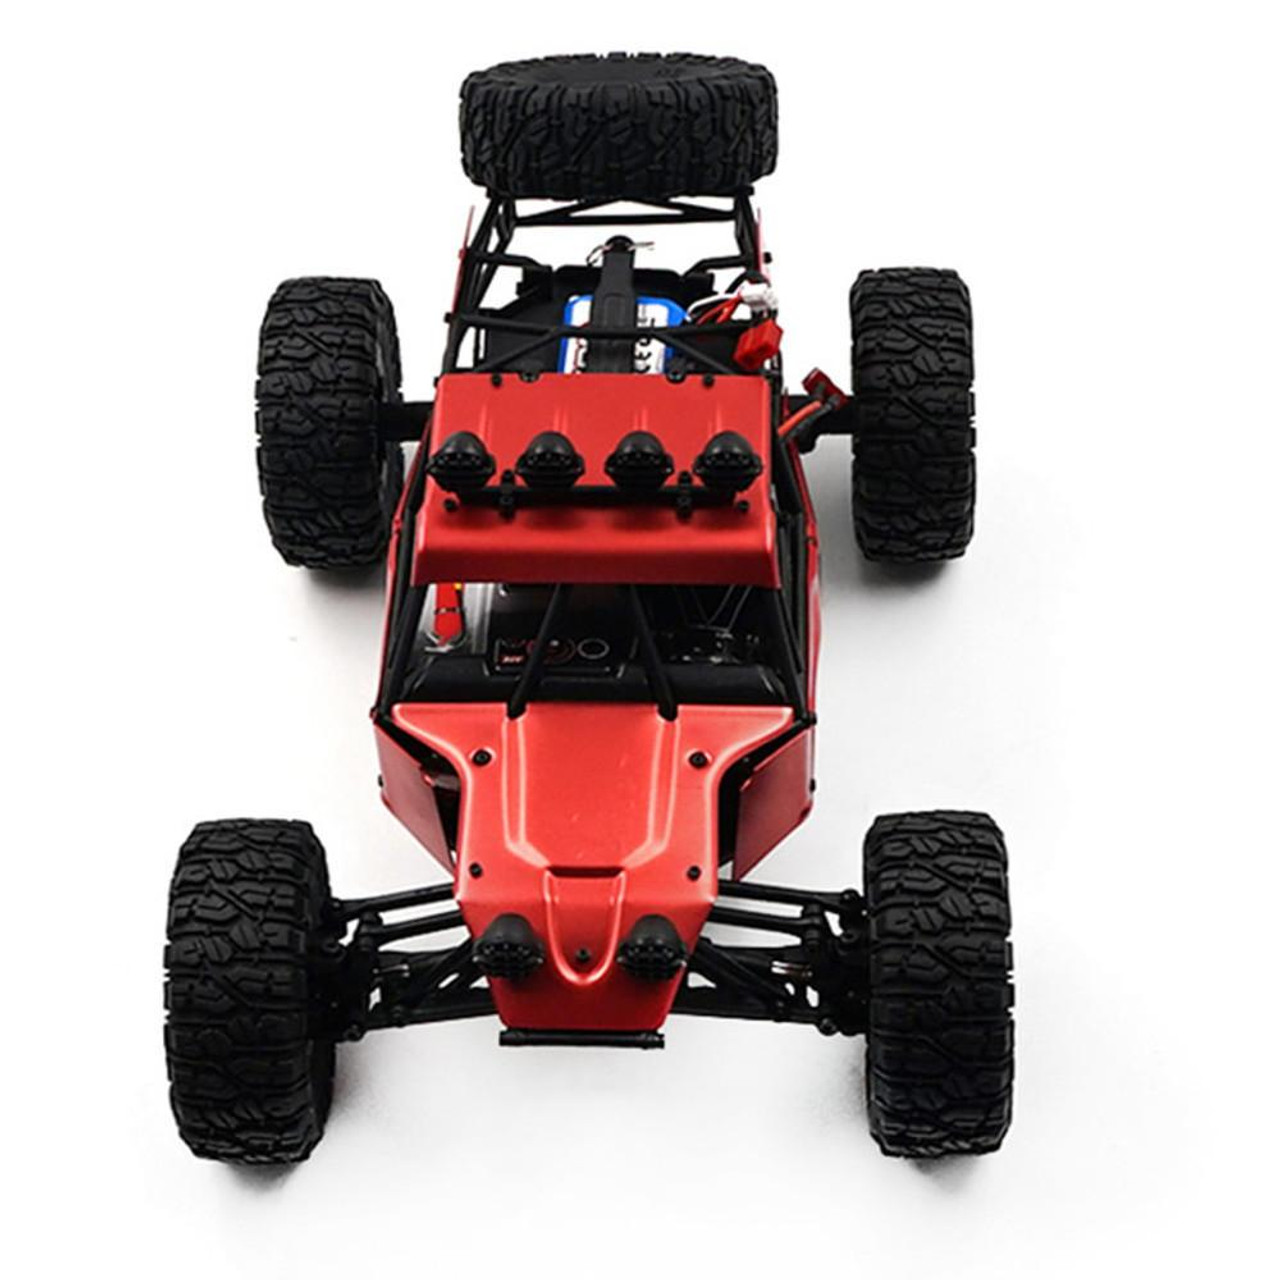 FY03H off-road high-speed car 1/12 70km/h 4WD rc desert off-road truck with  brushless 3800kv motor